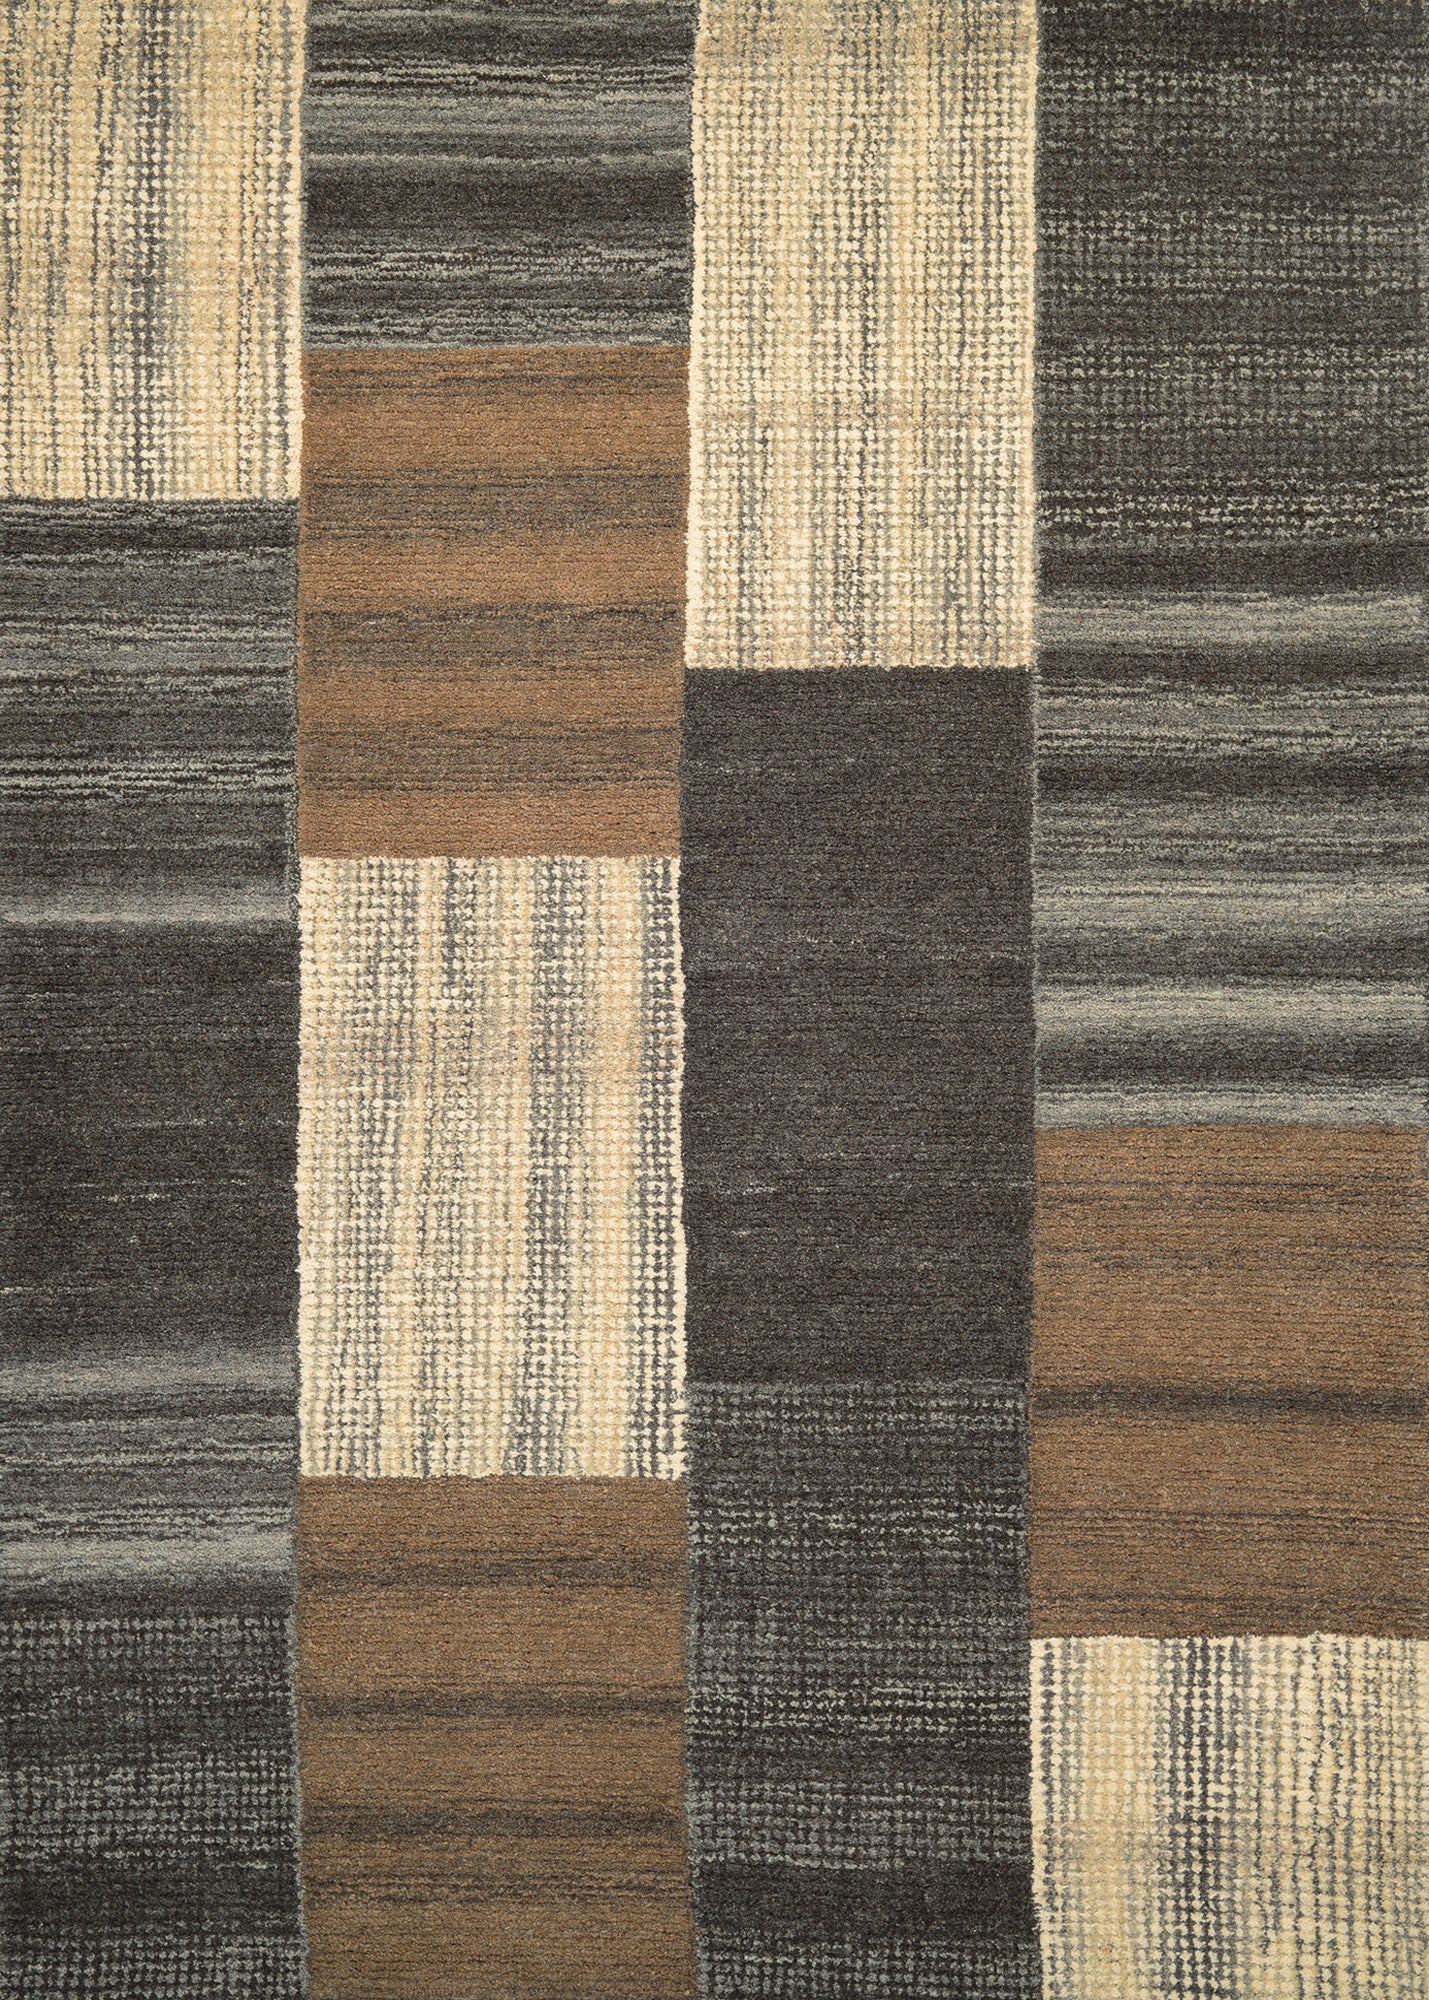 Couristan Super Indo Natural Luster Brown Area Rug